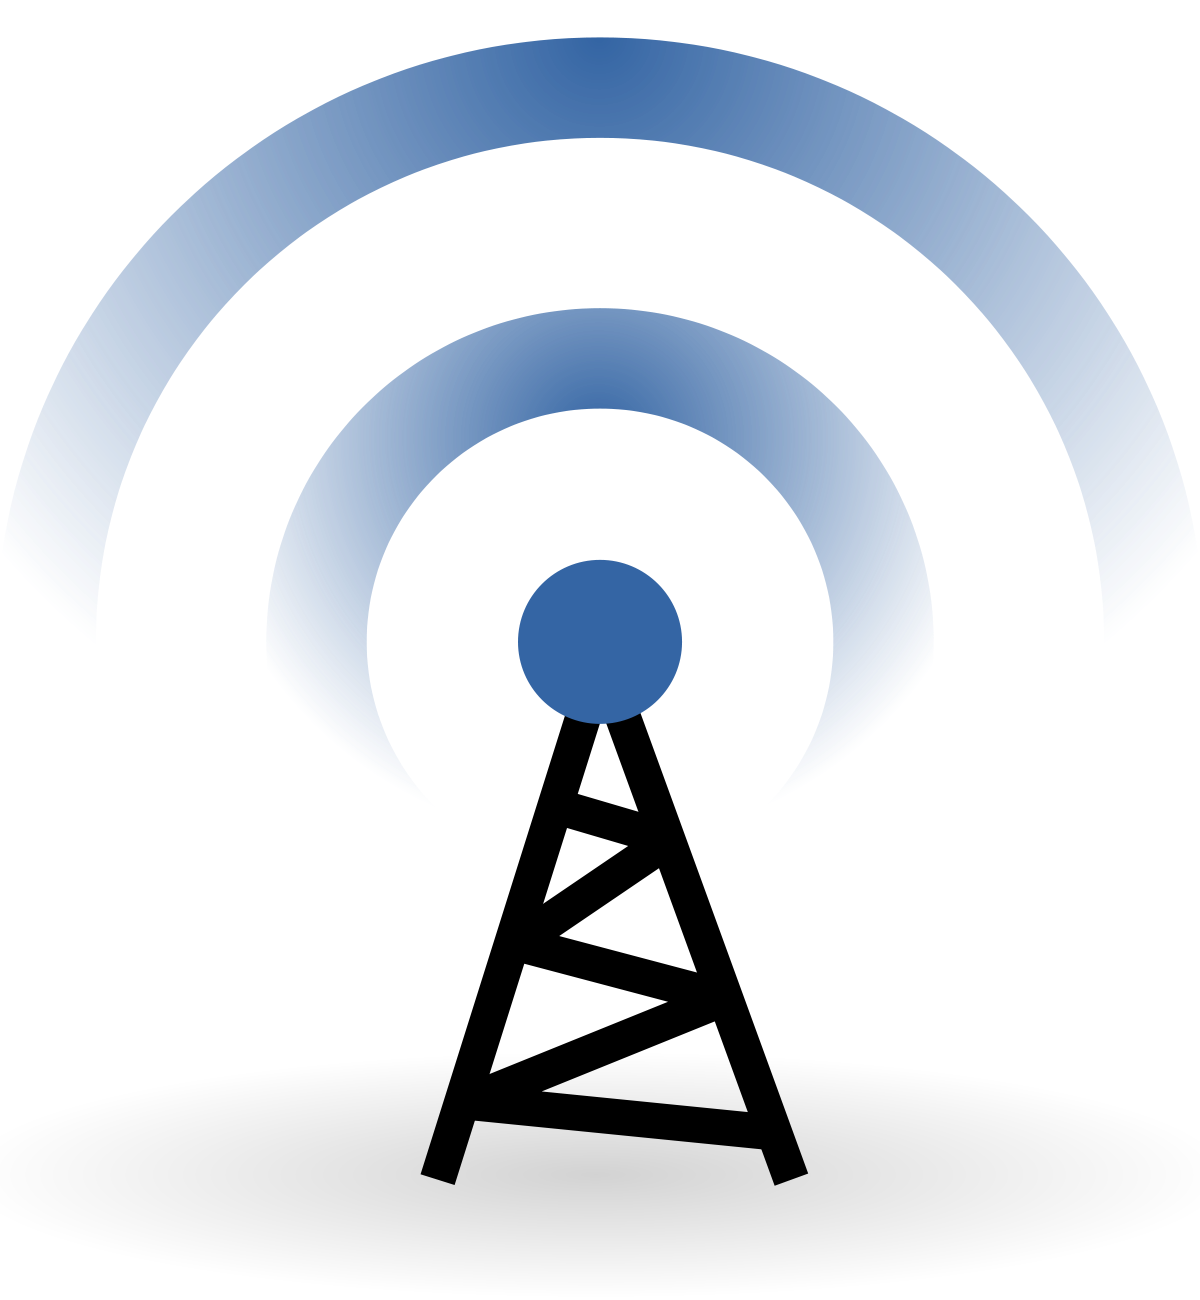 Multiple devices connected to a Wi-Fi network